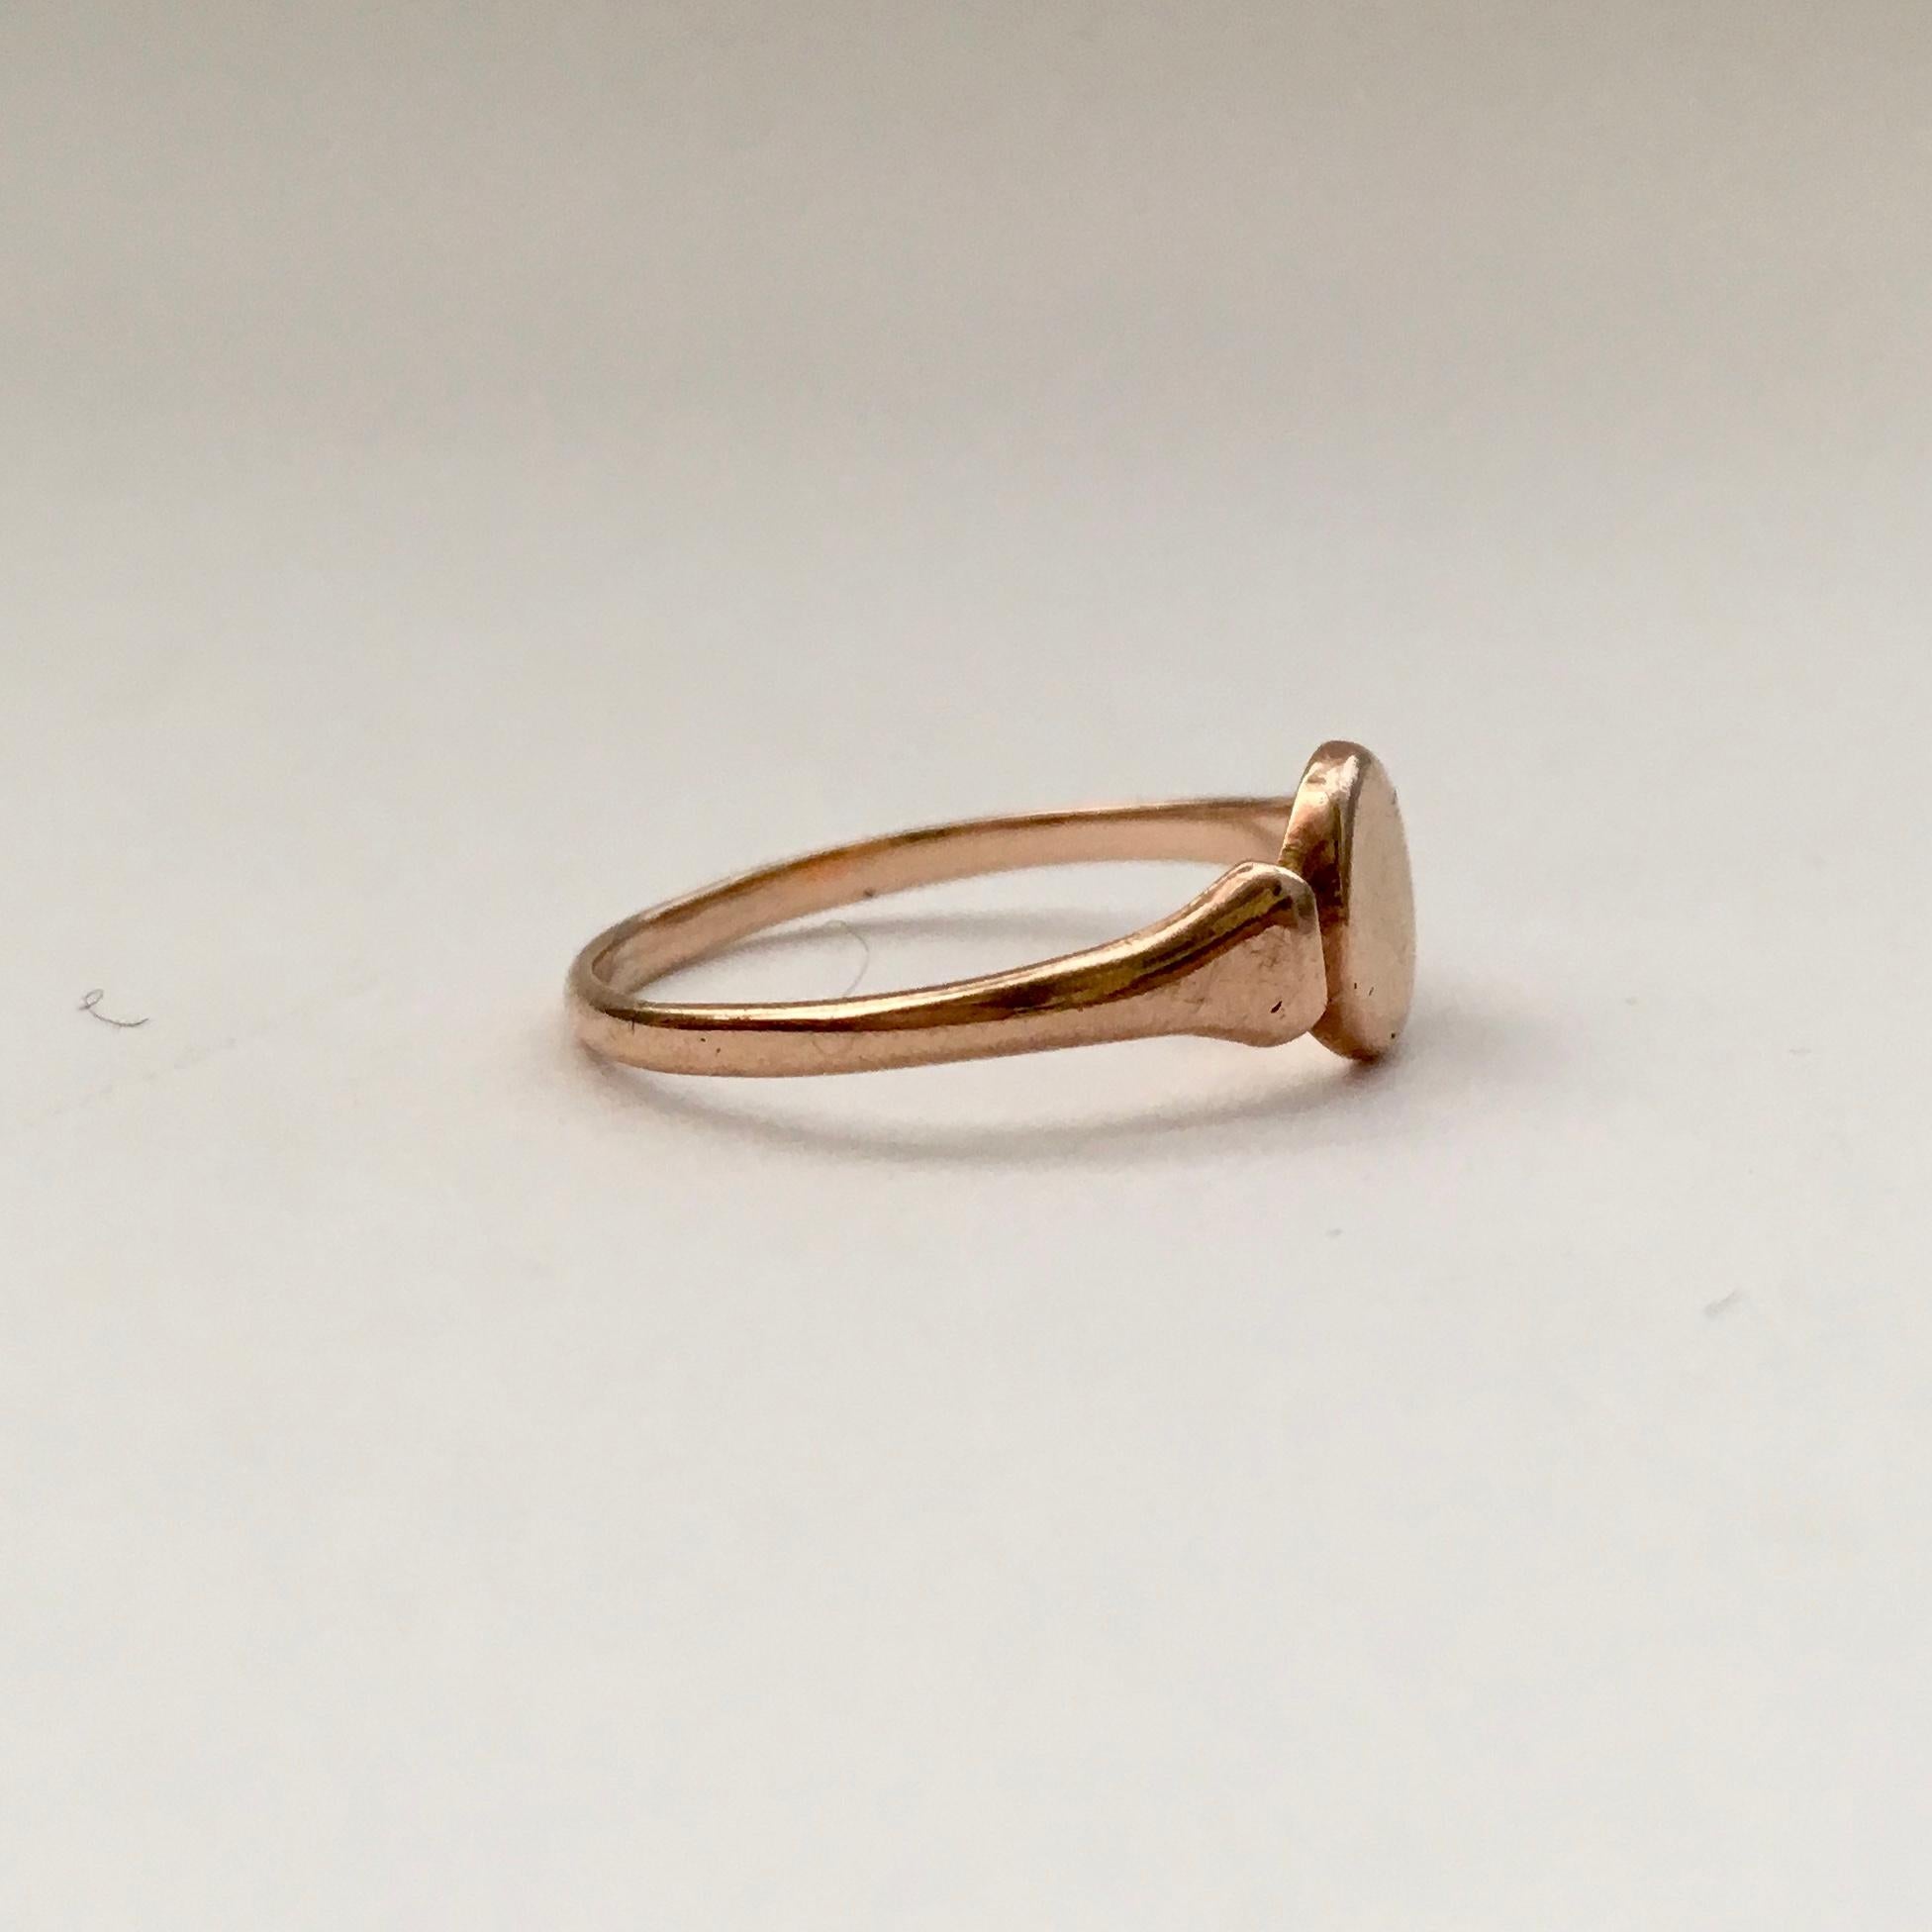 The signet ring is a an understated classic. This is a pretty rose gold example that dates from the Edwardian era. A petite size, it makes the perfect pinky or midi ring. The signet section of the ring measures 0.6cm high and 0.5cm wide. It is